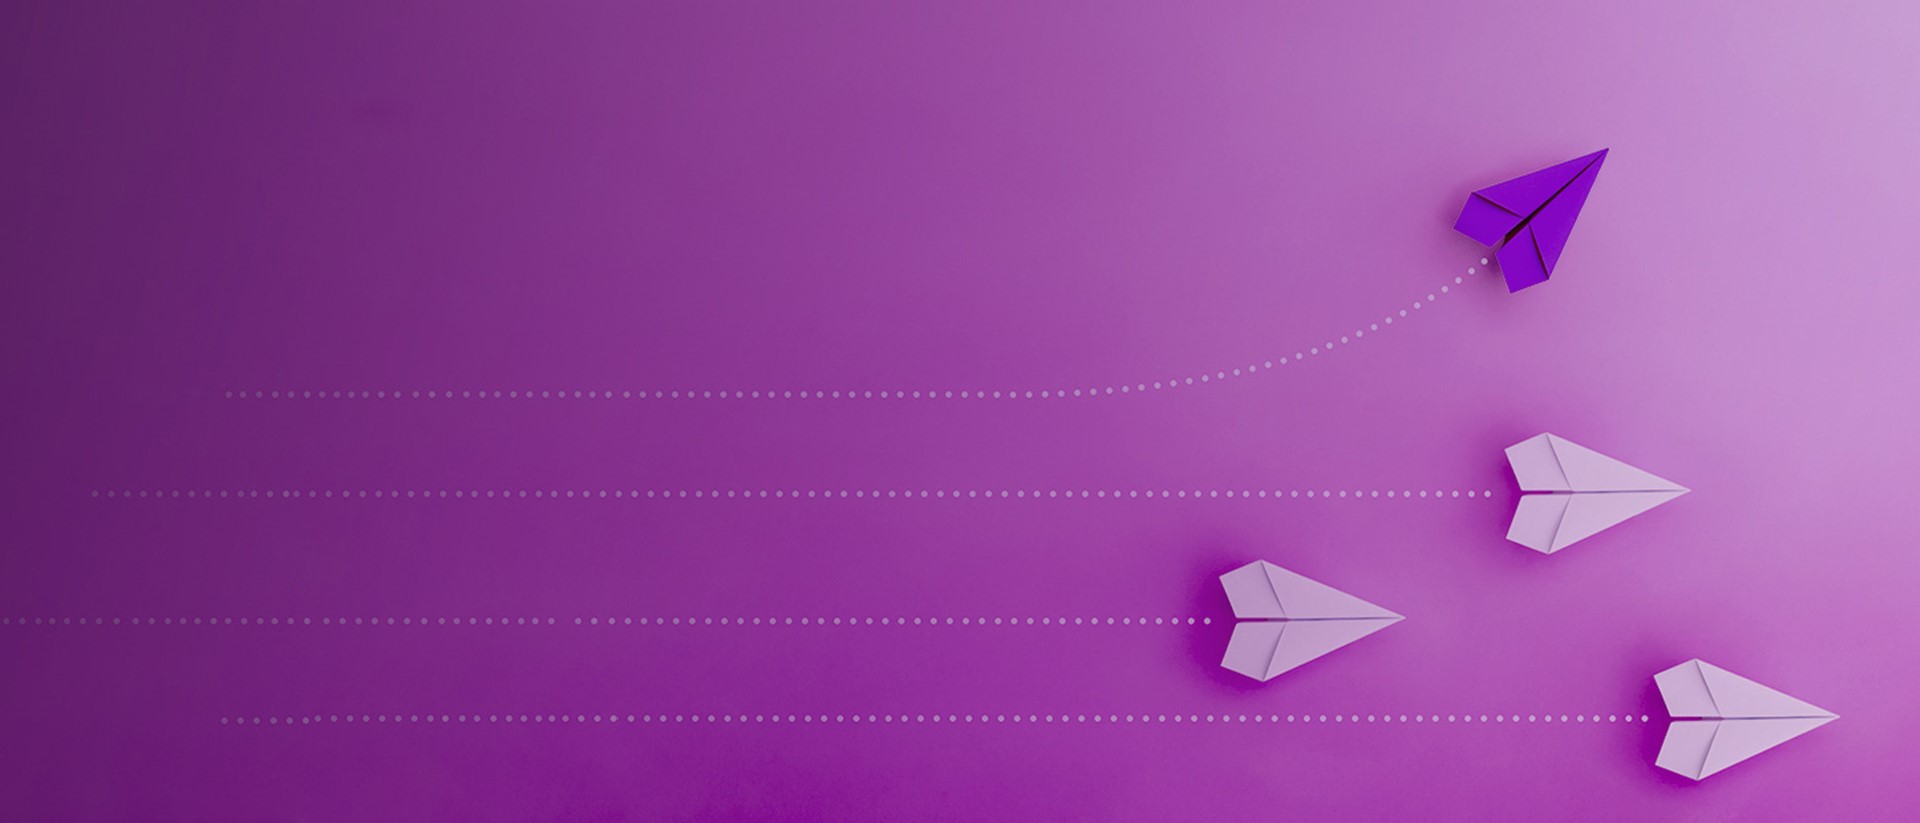 Image of paper airplanes flying to the right on a purple background